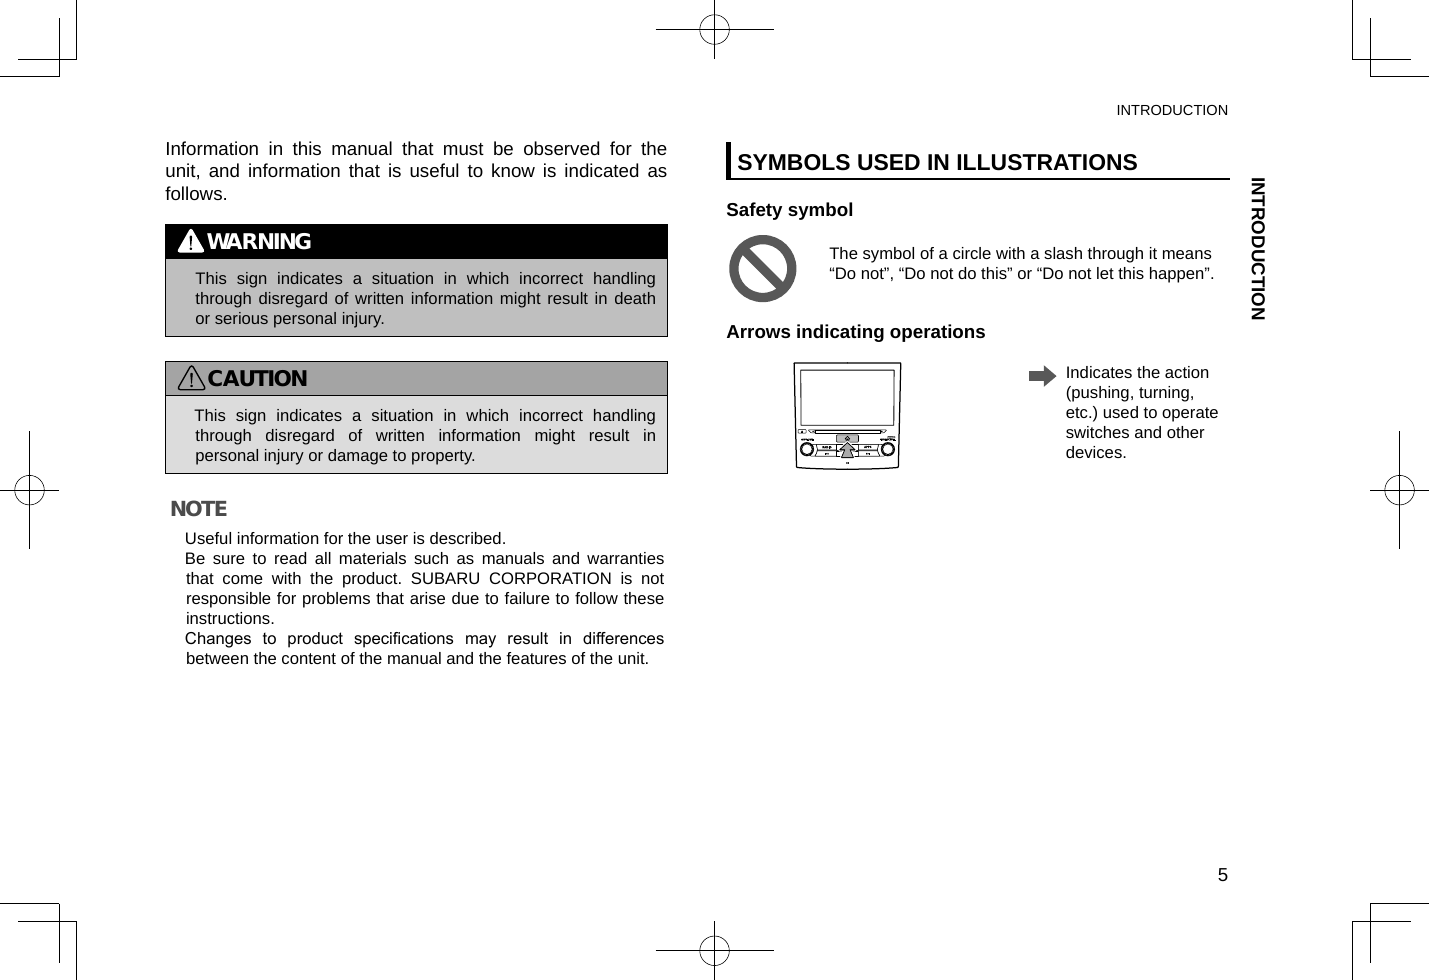 Information in this manual that must be observed for the unit, and information that is useful to know is indicated as follows.WARNING lThis sign indicates a situation in which incorrect handling through disregard of written information might result in death or serious personal injury.CAUTION lThis sign indicates a situation in which incorrect handling through disregard of written information might result in personal injury or damage to property.NOTE lUseful information for the user is described.  lBe sure to read all materials such as manuals and warranties that come with the product. SUBARU CORPORATION is not responsible for problems that arise due to failure to follow these instructions. lChanges  to  product  specications  may  result  in  differences between the content of the manual and the features of the unit.SYMBOLS USED IN ILLUSTRATIONSSafety symbolThe symbol of a circle with a slash through it means “Do not”, “Do not do this” or “Do not let this happen”.Arrows indicating operations    Indicates the action (pushing, turning, etc.) used to operate switches and other devices.INTRODUCTIONINTRODUCTION5